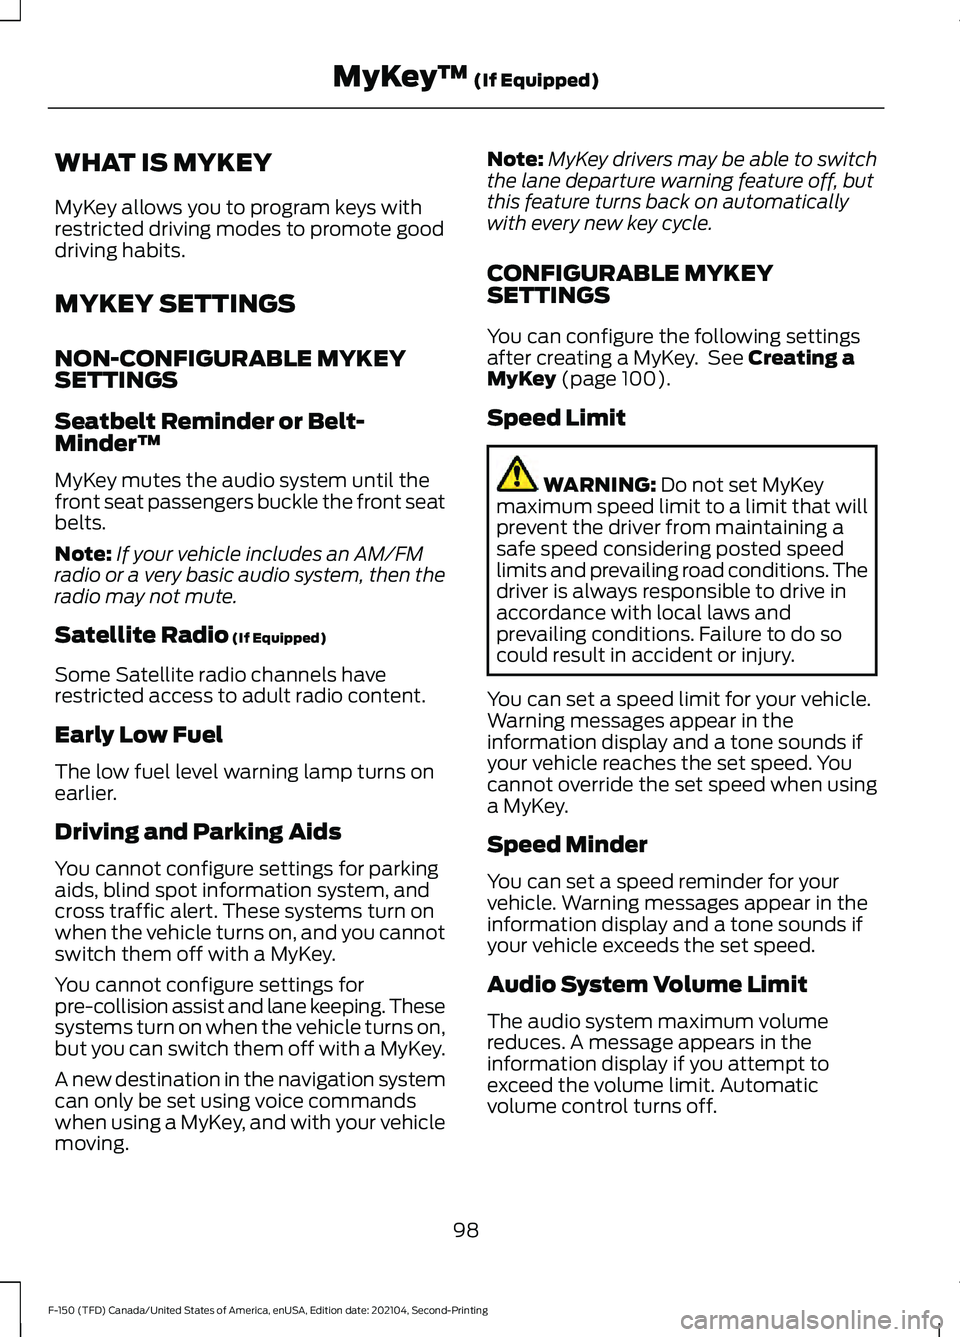 FORD F-150 2021  Owners Manual WHAT IS MYKEY
MyKey allows you to program keys with
restricted driving modes to promote good
driving habits.
MYKEY SETTINGS
NON-CONFIGURABLE MYKEY
SETTINGS
Seatbelt Reminder or Belt-
Minder™
MyKey m